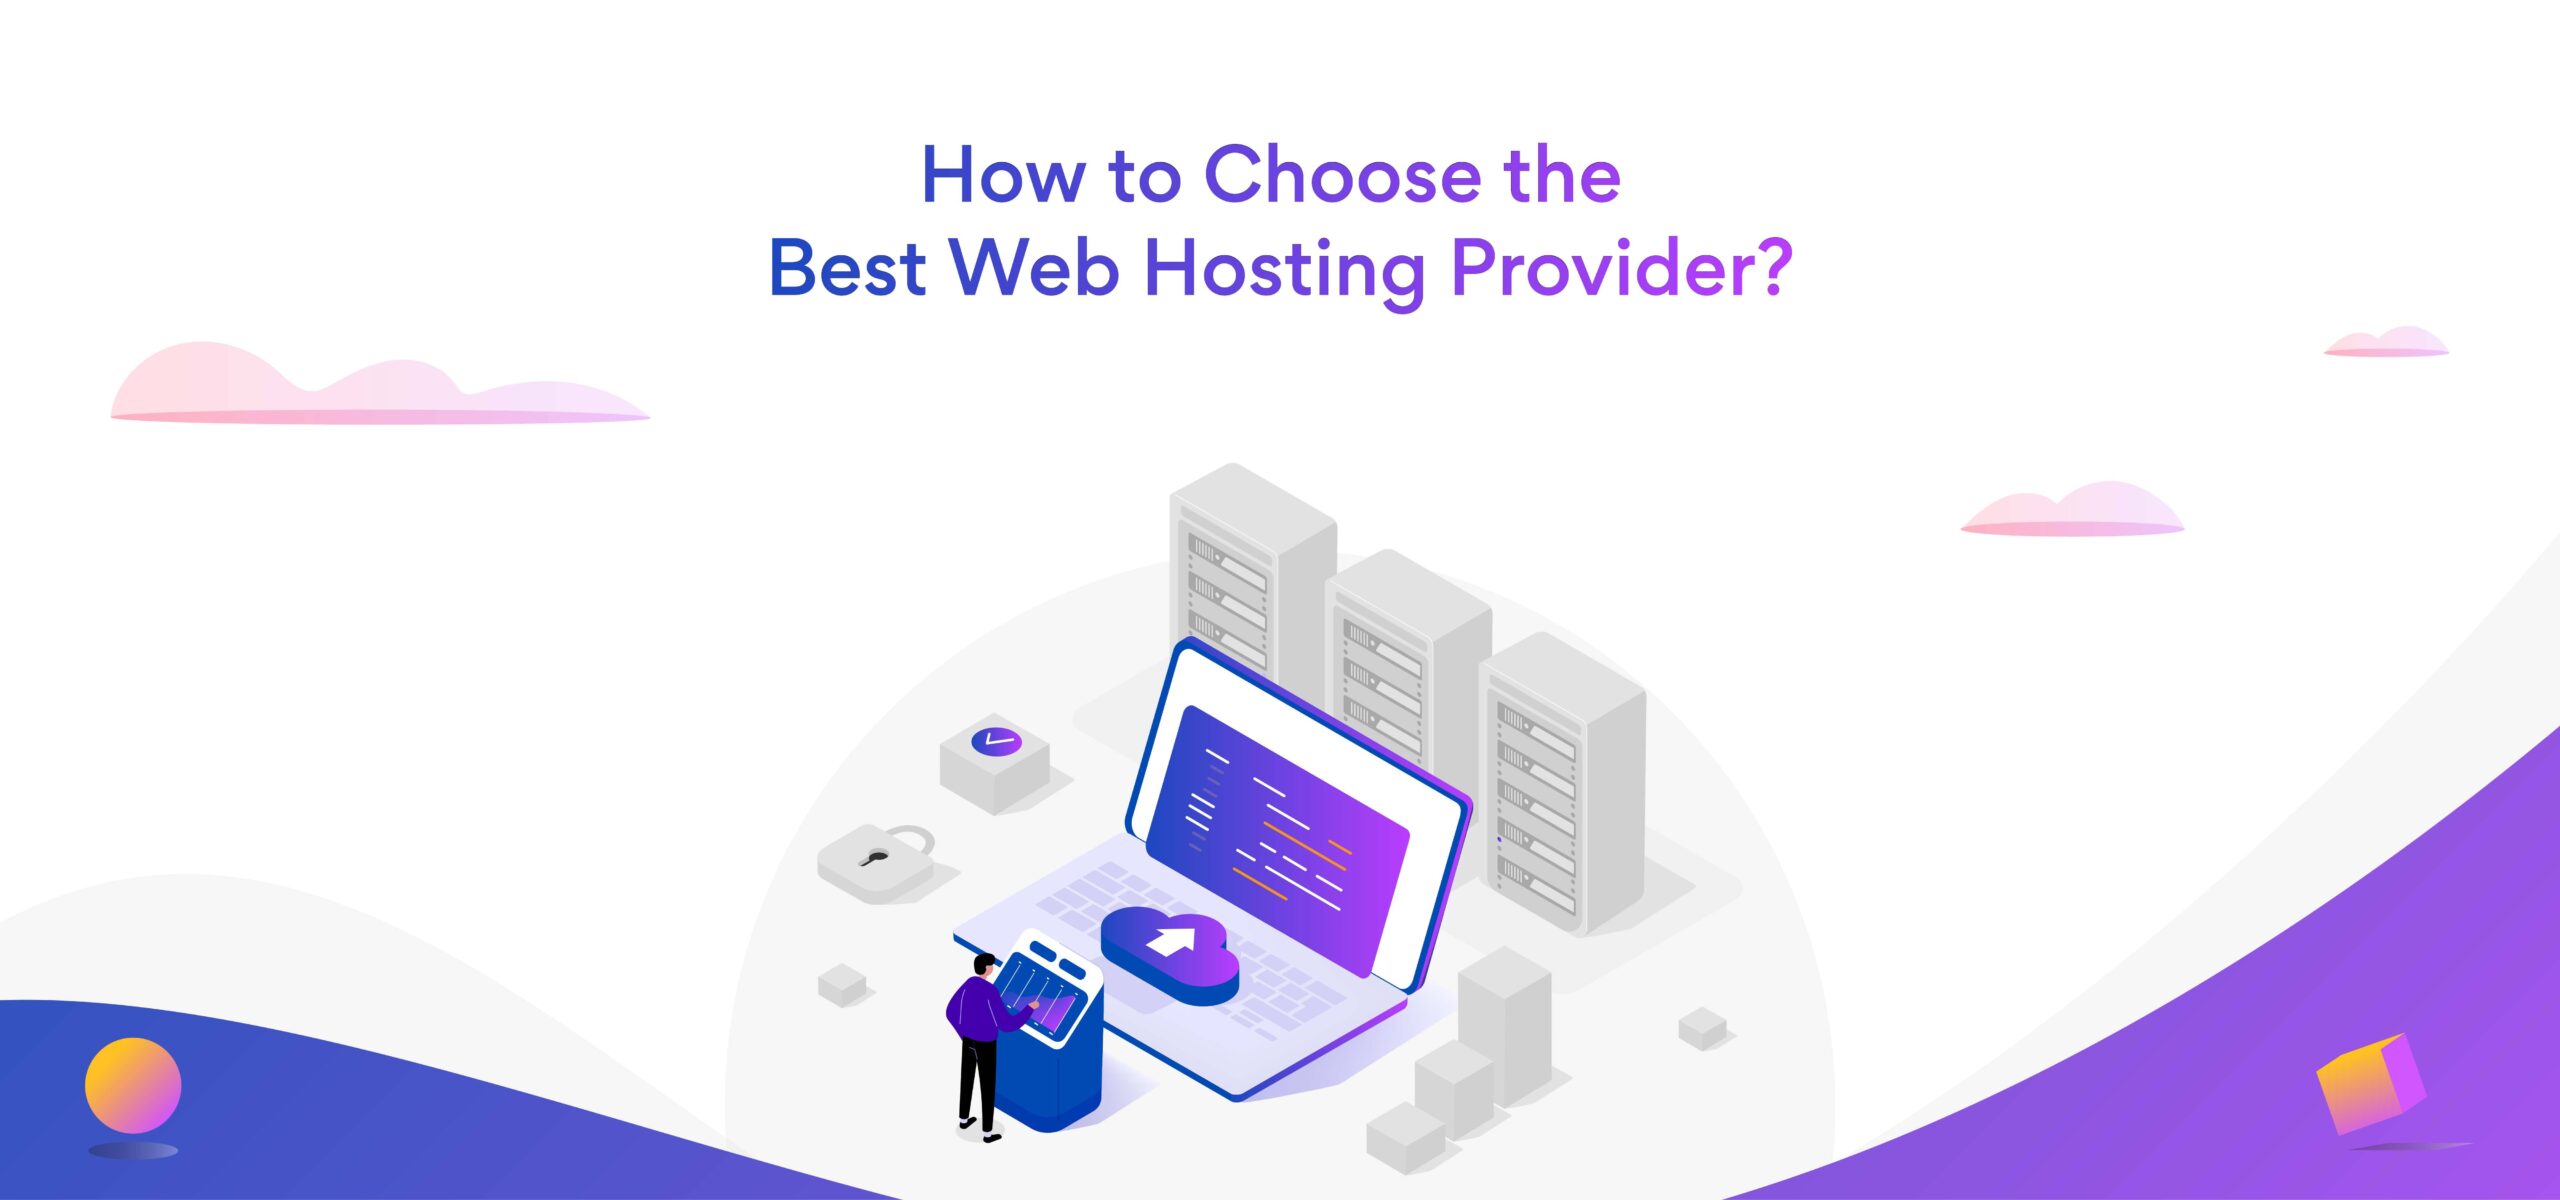 How to Choose the Best Web Hosting Provider?